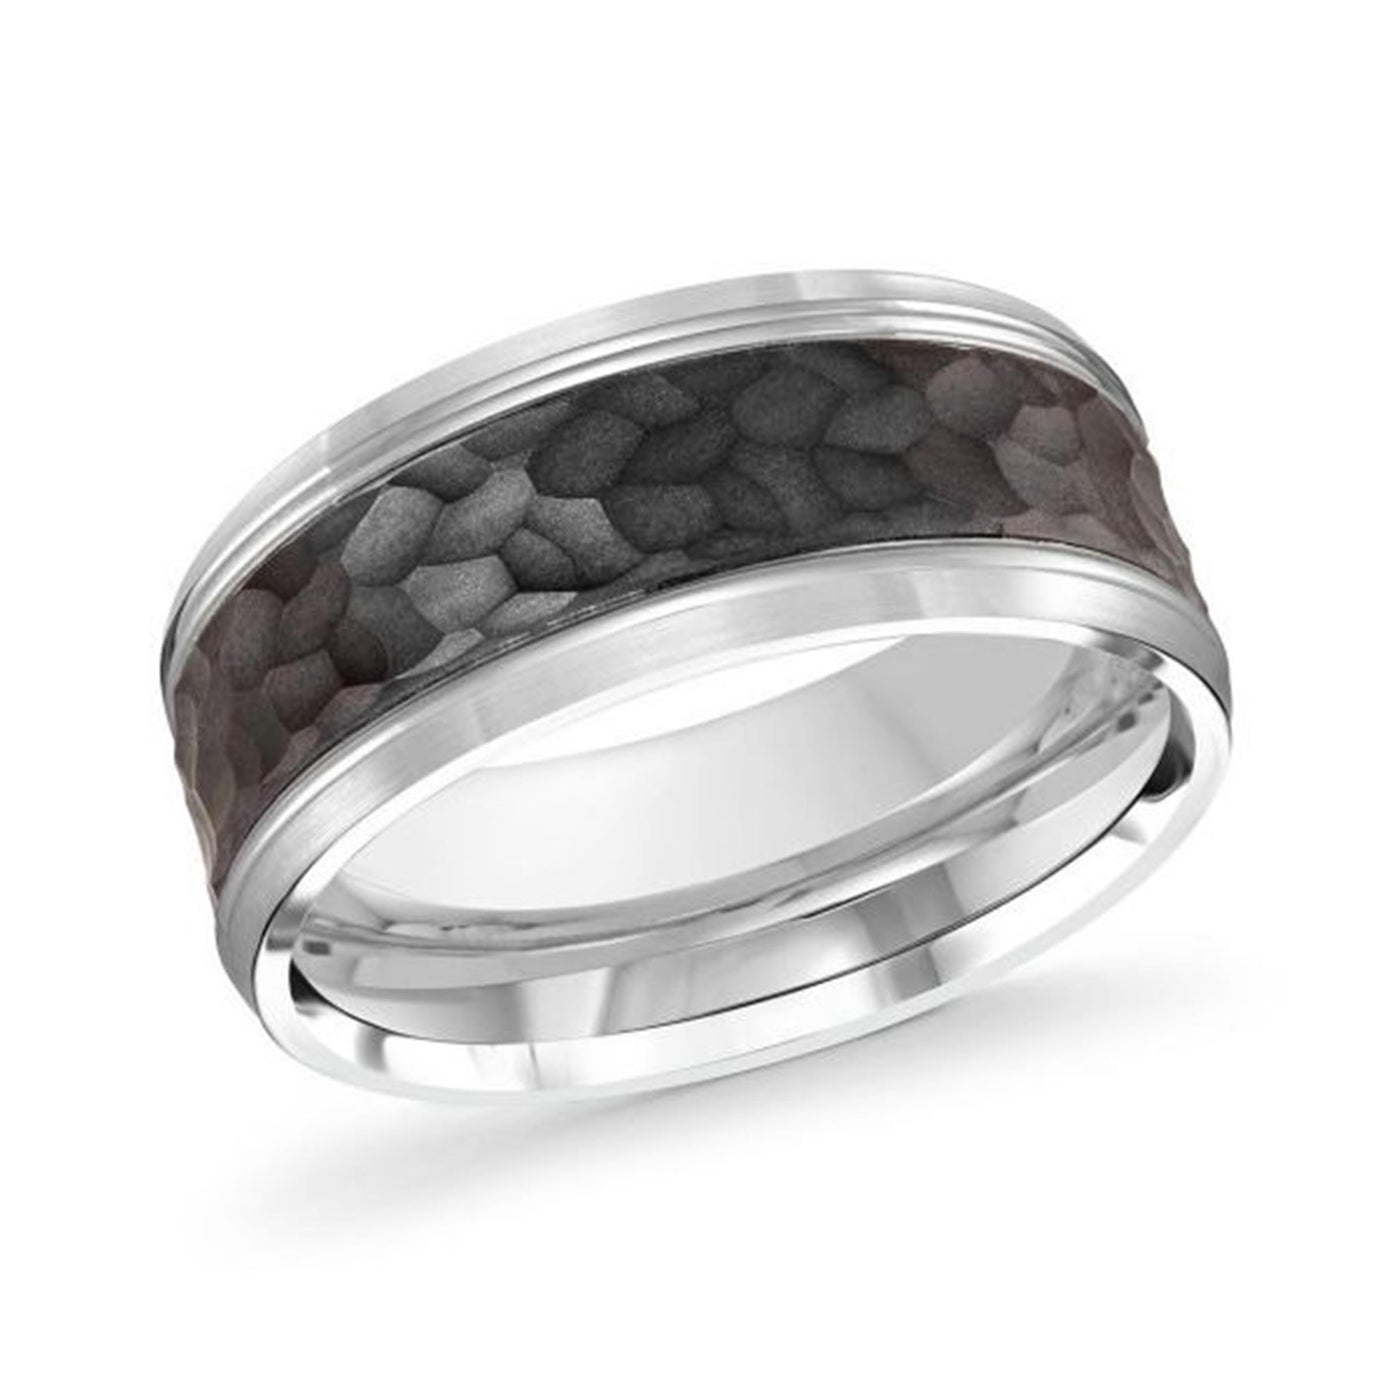 Malo 9mm Carbon Fiber and 14K White Gold Wedding Band